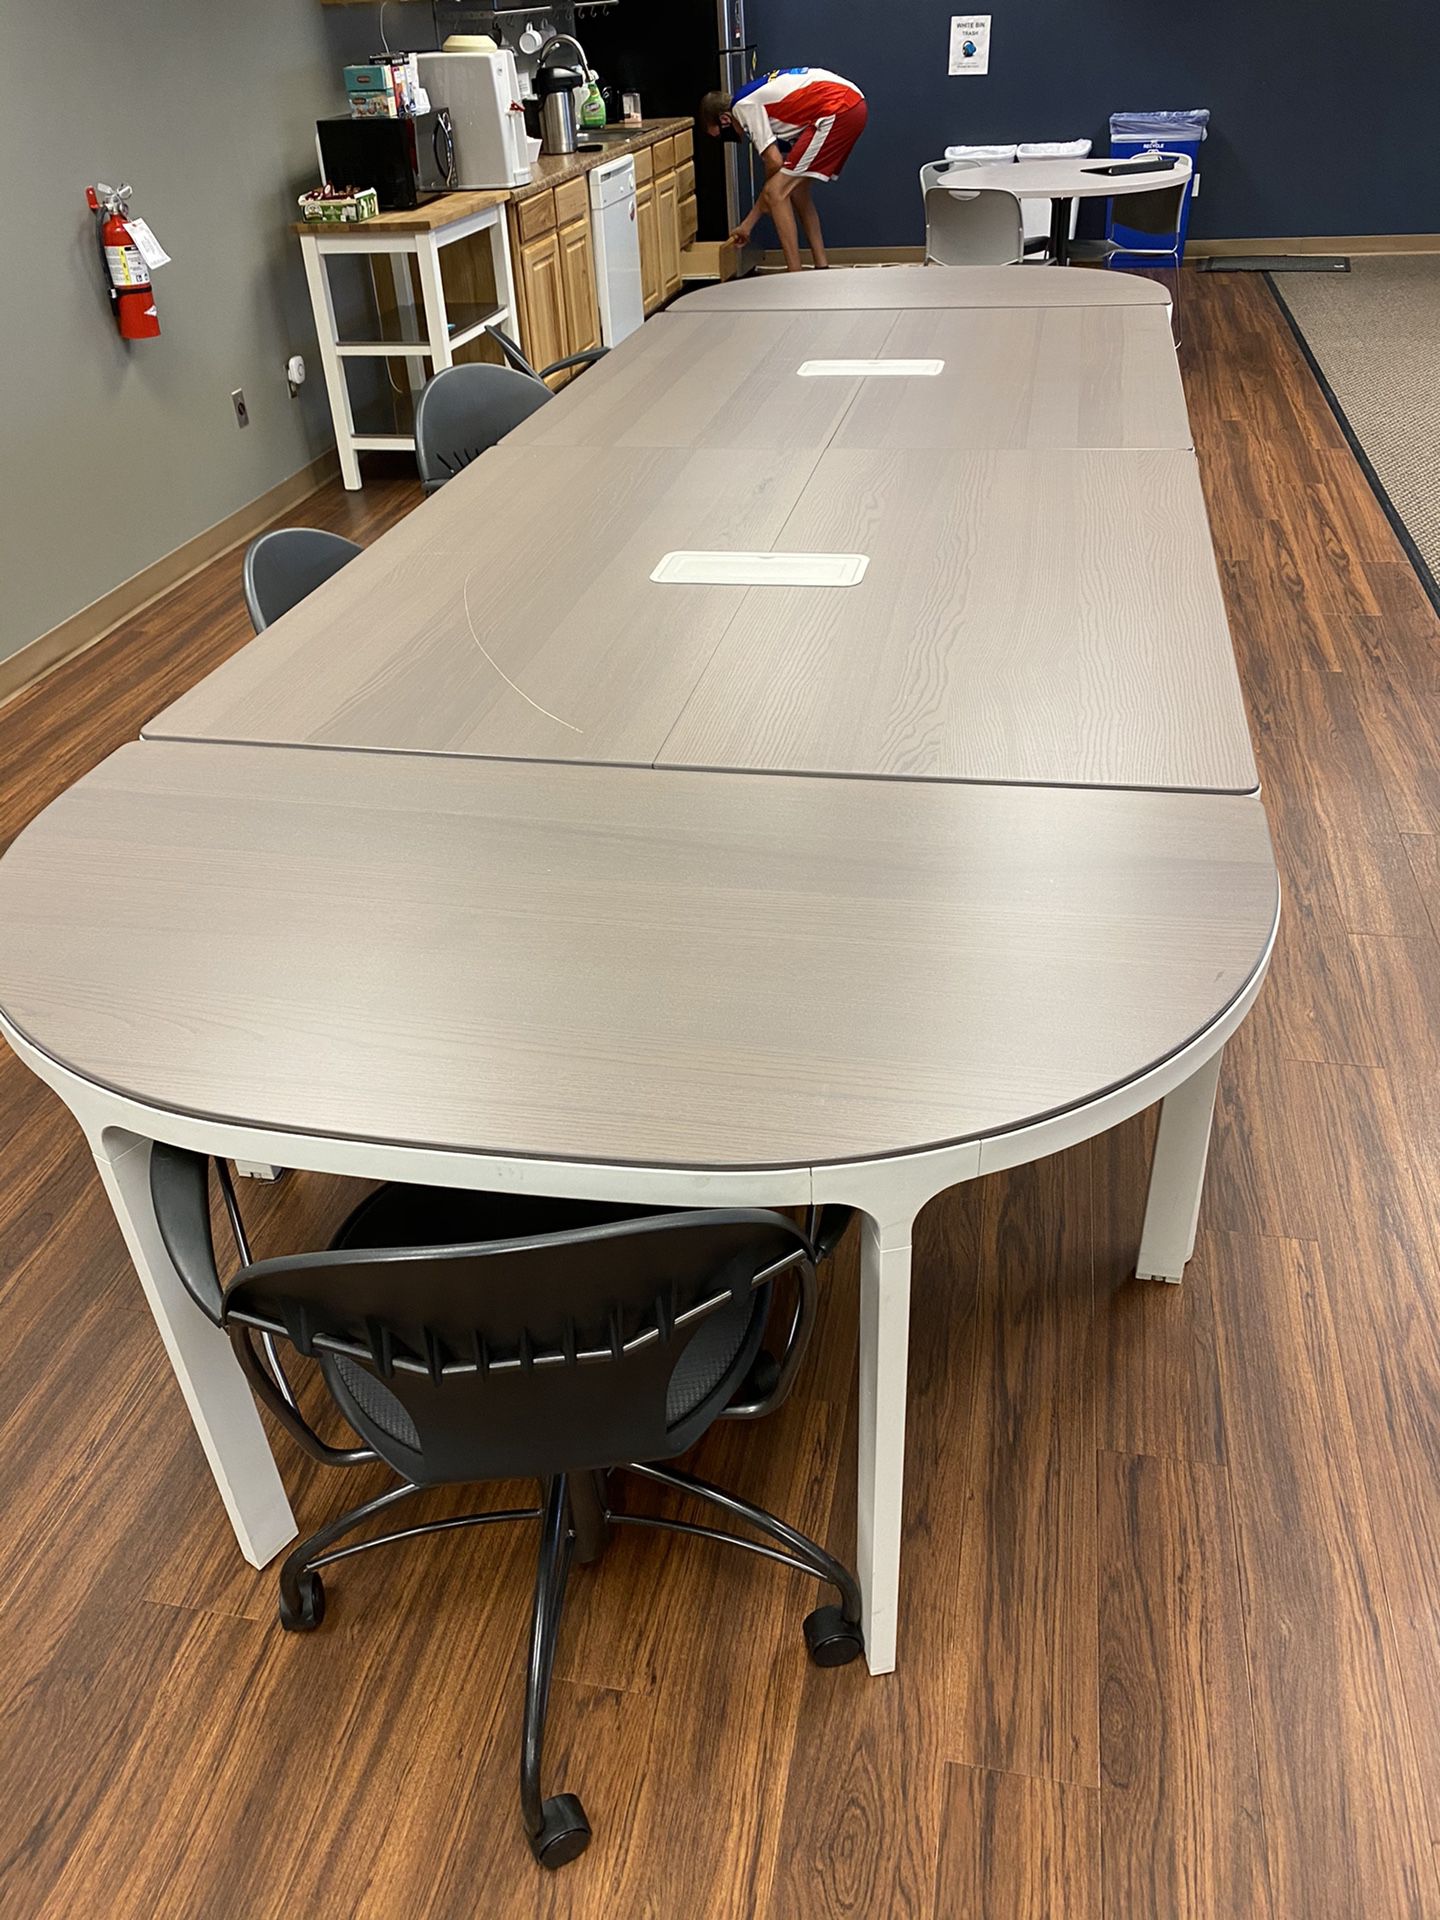 Conferences room table - IKEA Bekant conference table